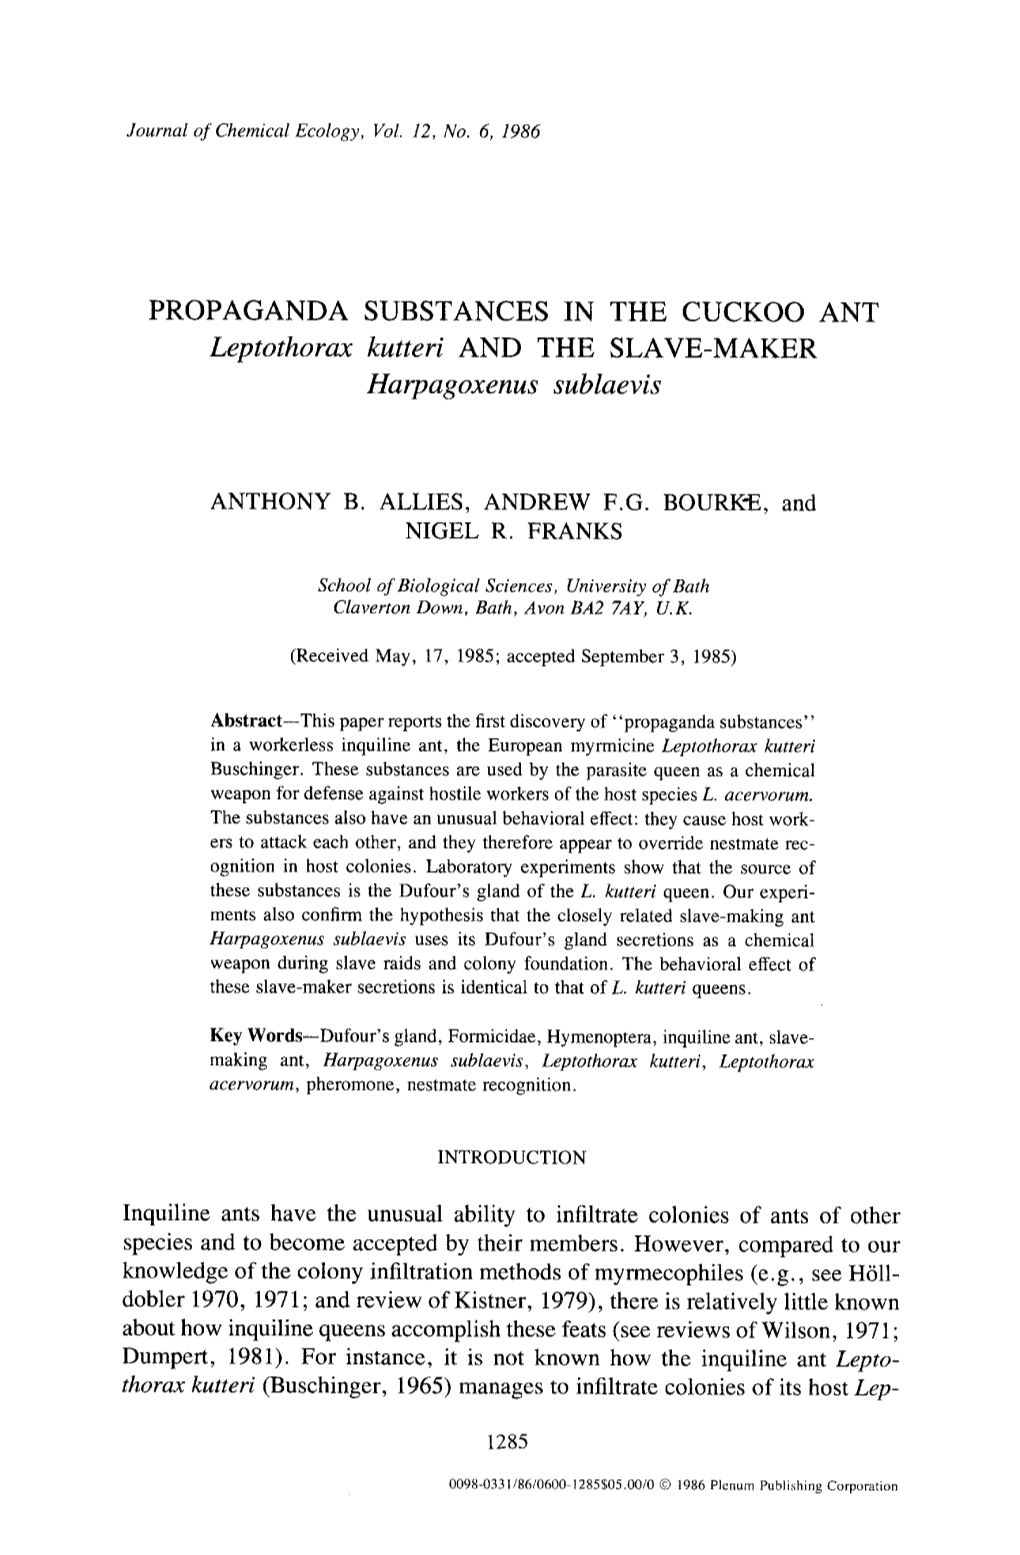 PROPAGANDA SUBSTANCES in the CUCKOO ANT Leptothorax Kutteri and the SLAVE-MAKER Harpagoxenus Sublaevis